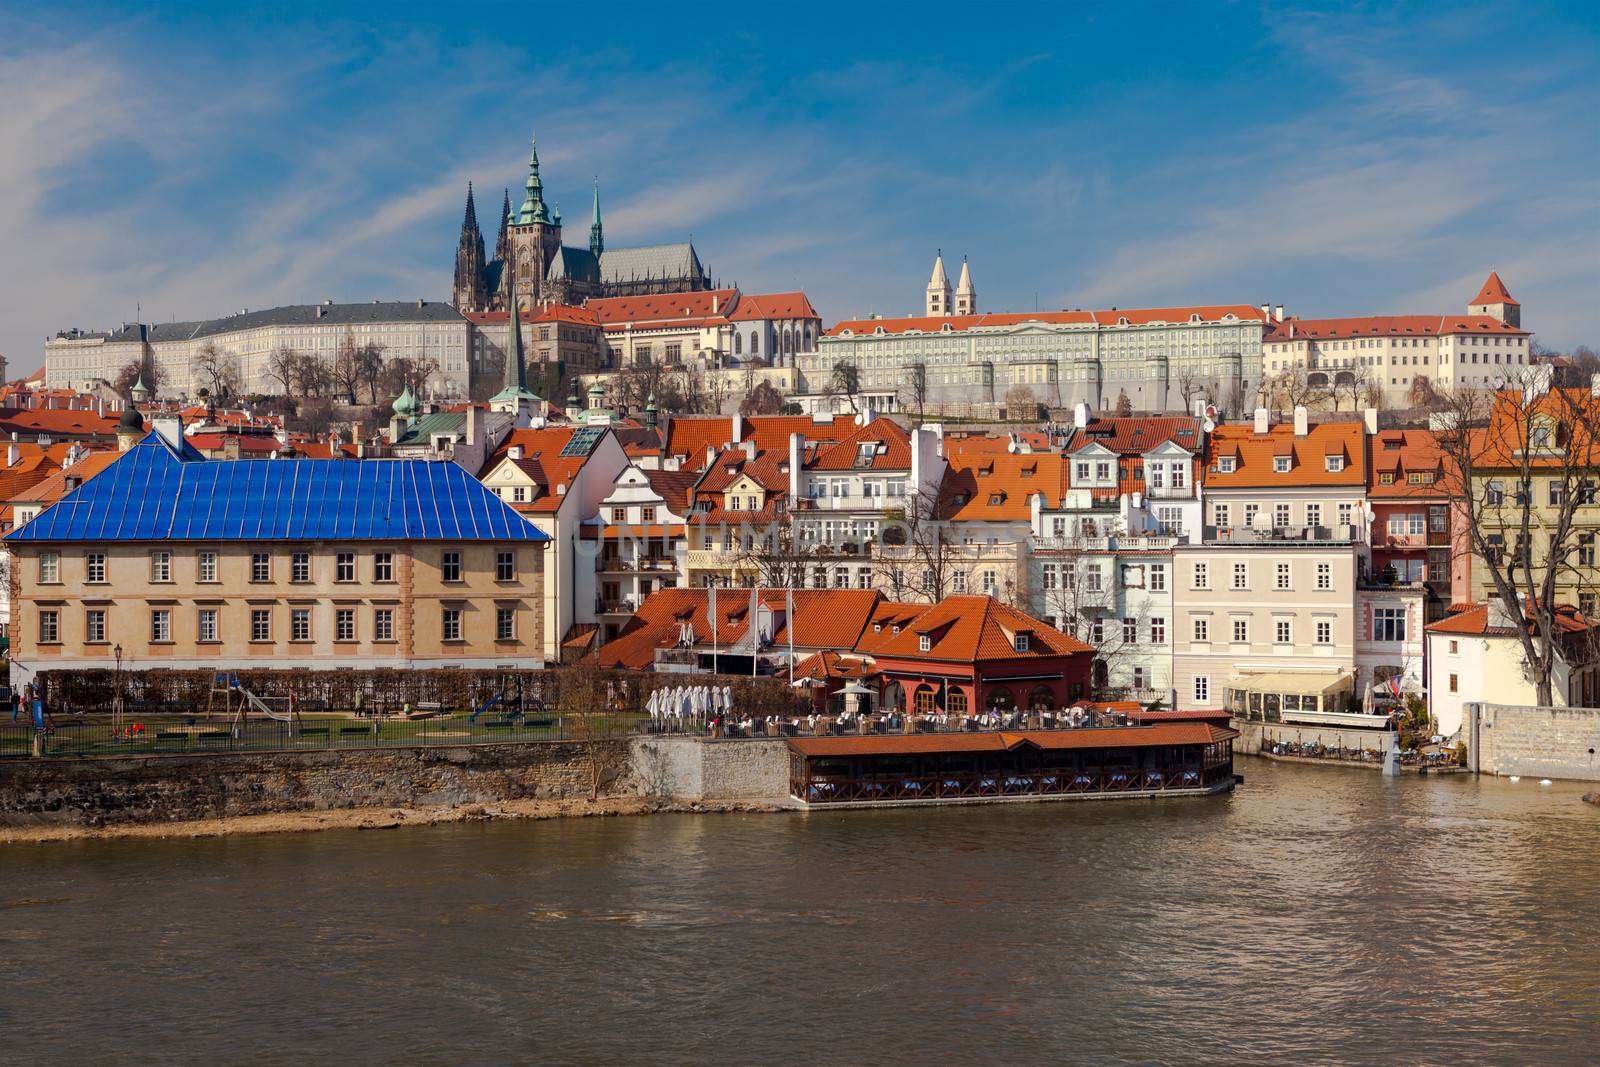 A snapshot of the Prague castle from the bridge